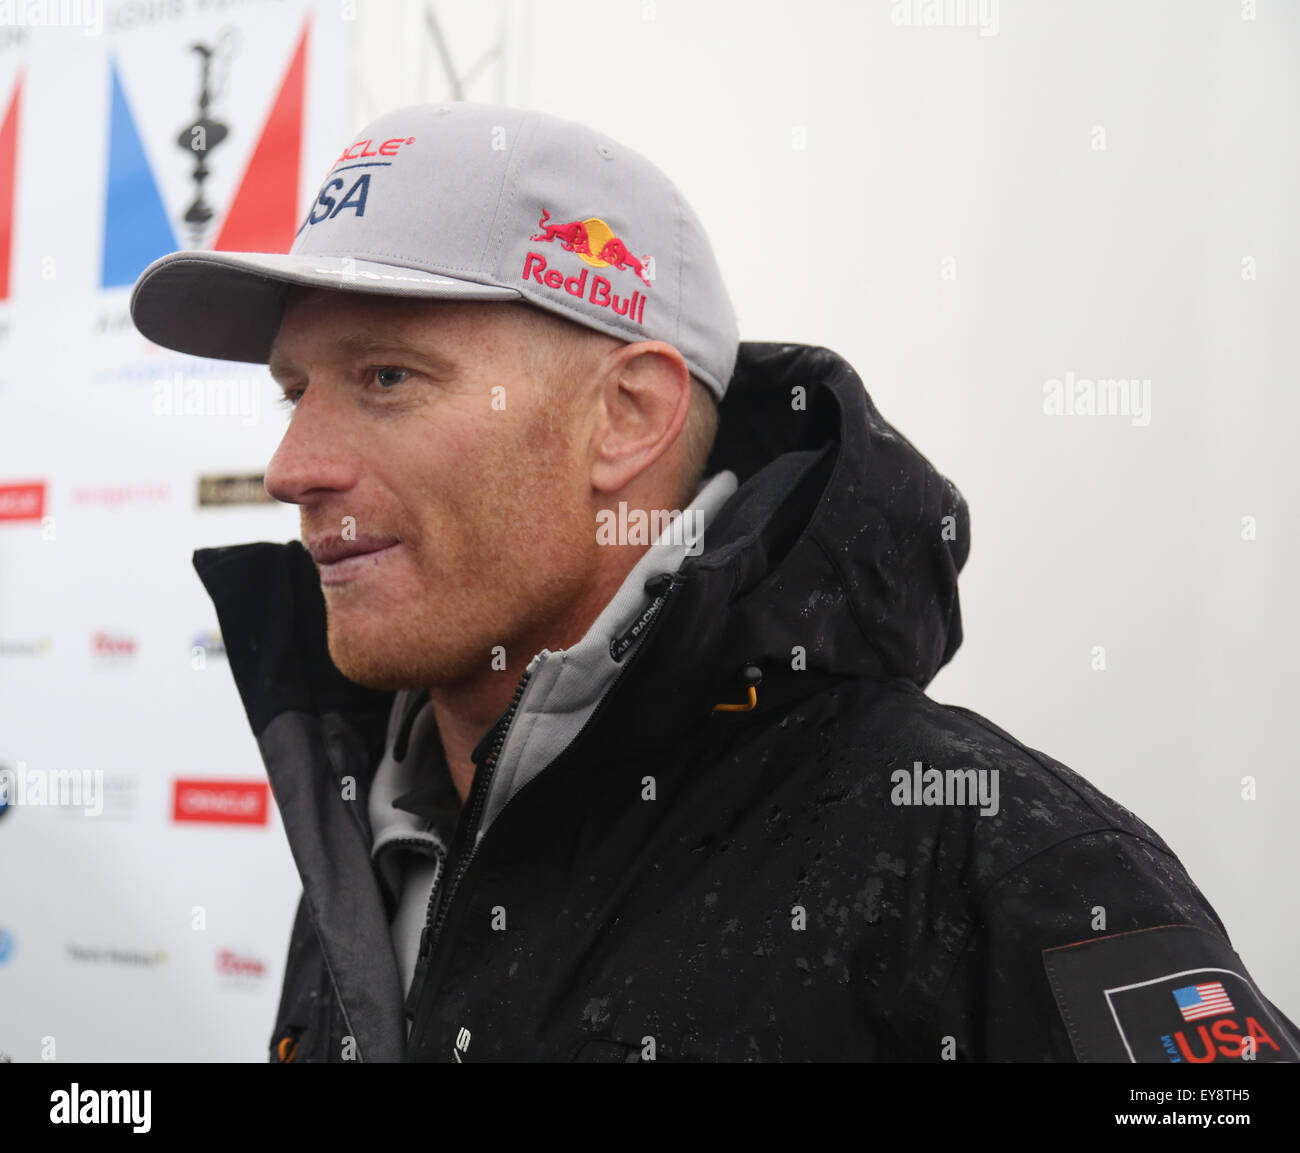 Southsea, Hampshire, Royaume-Uni. 24 juillet, 2015. America's cup. Photo : Équipe d'Oracle USA Skipper Jimmy Spithill. Credit : uknip/ Alamy Live News Banque D'Images